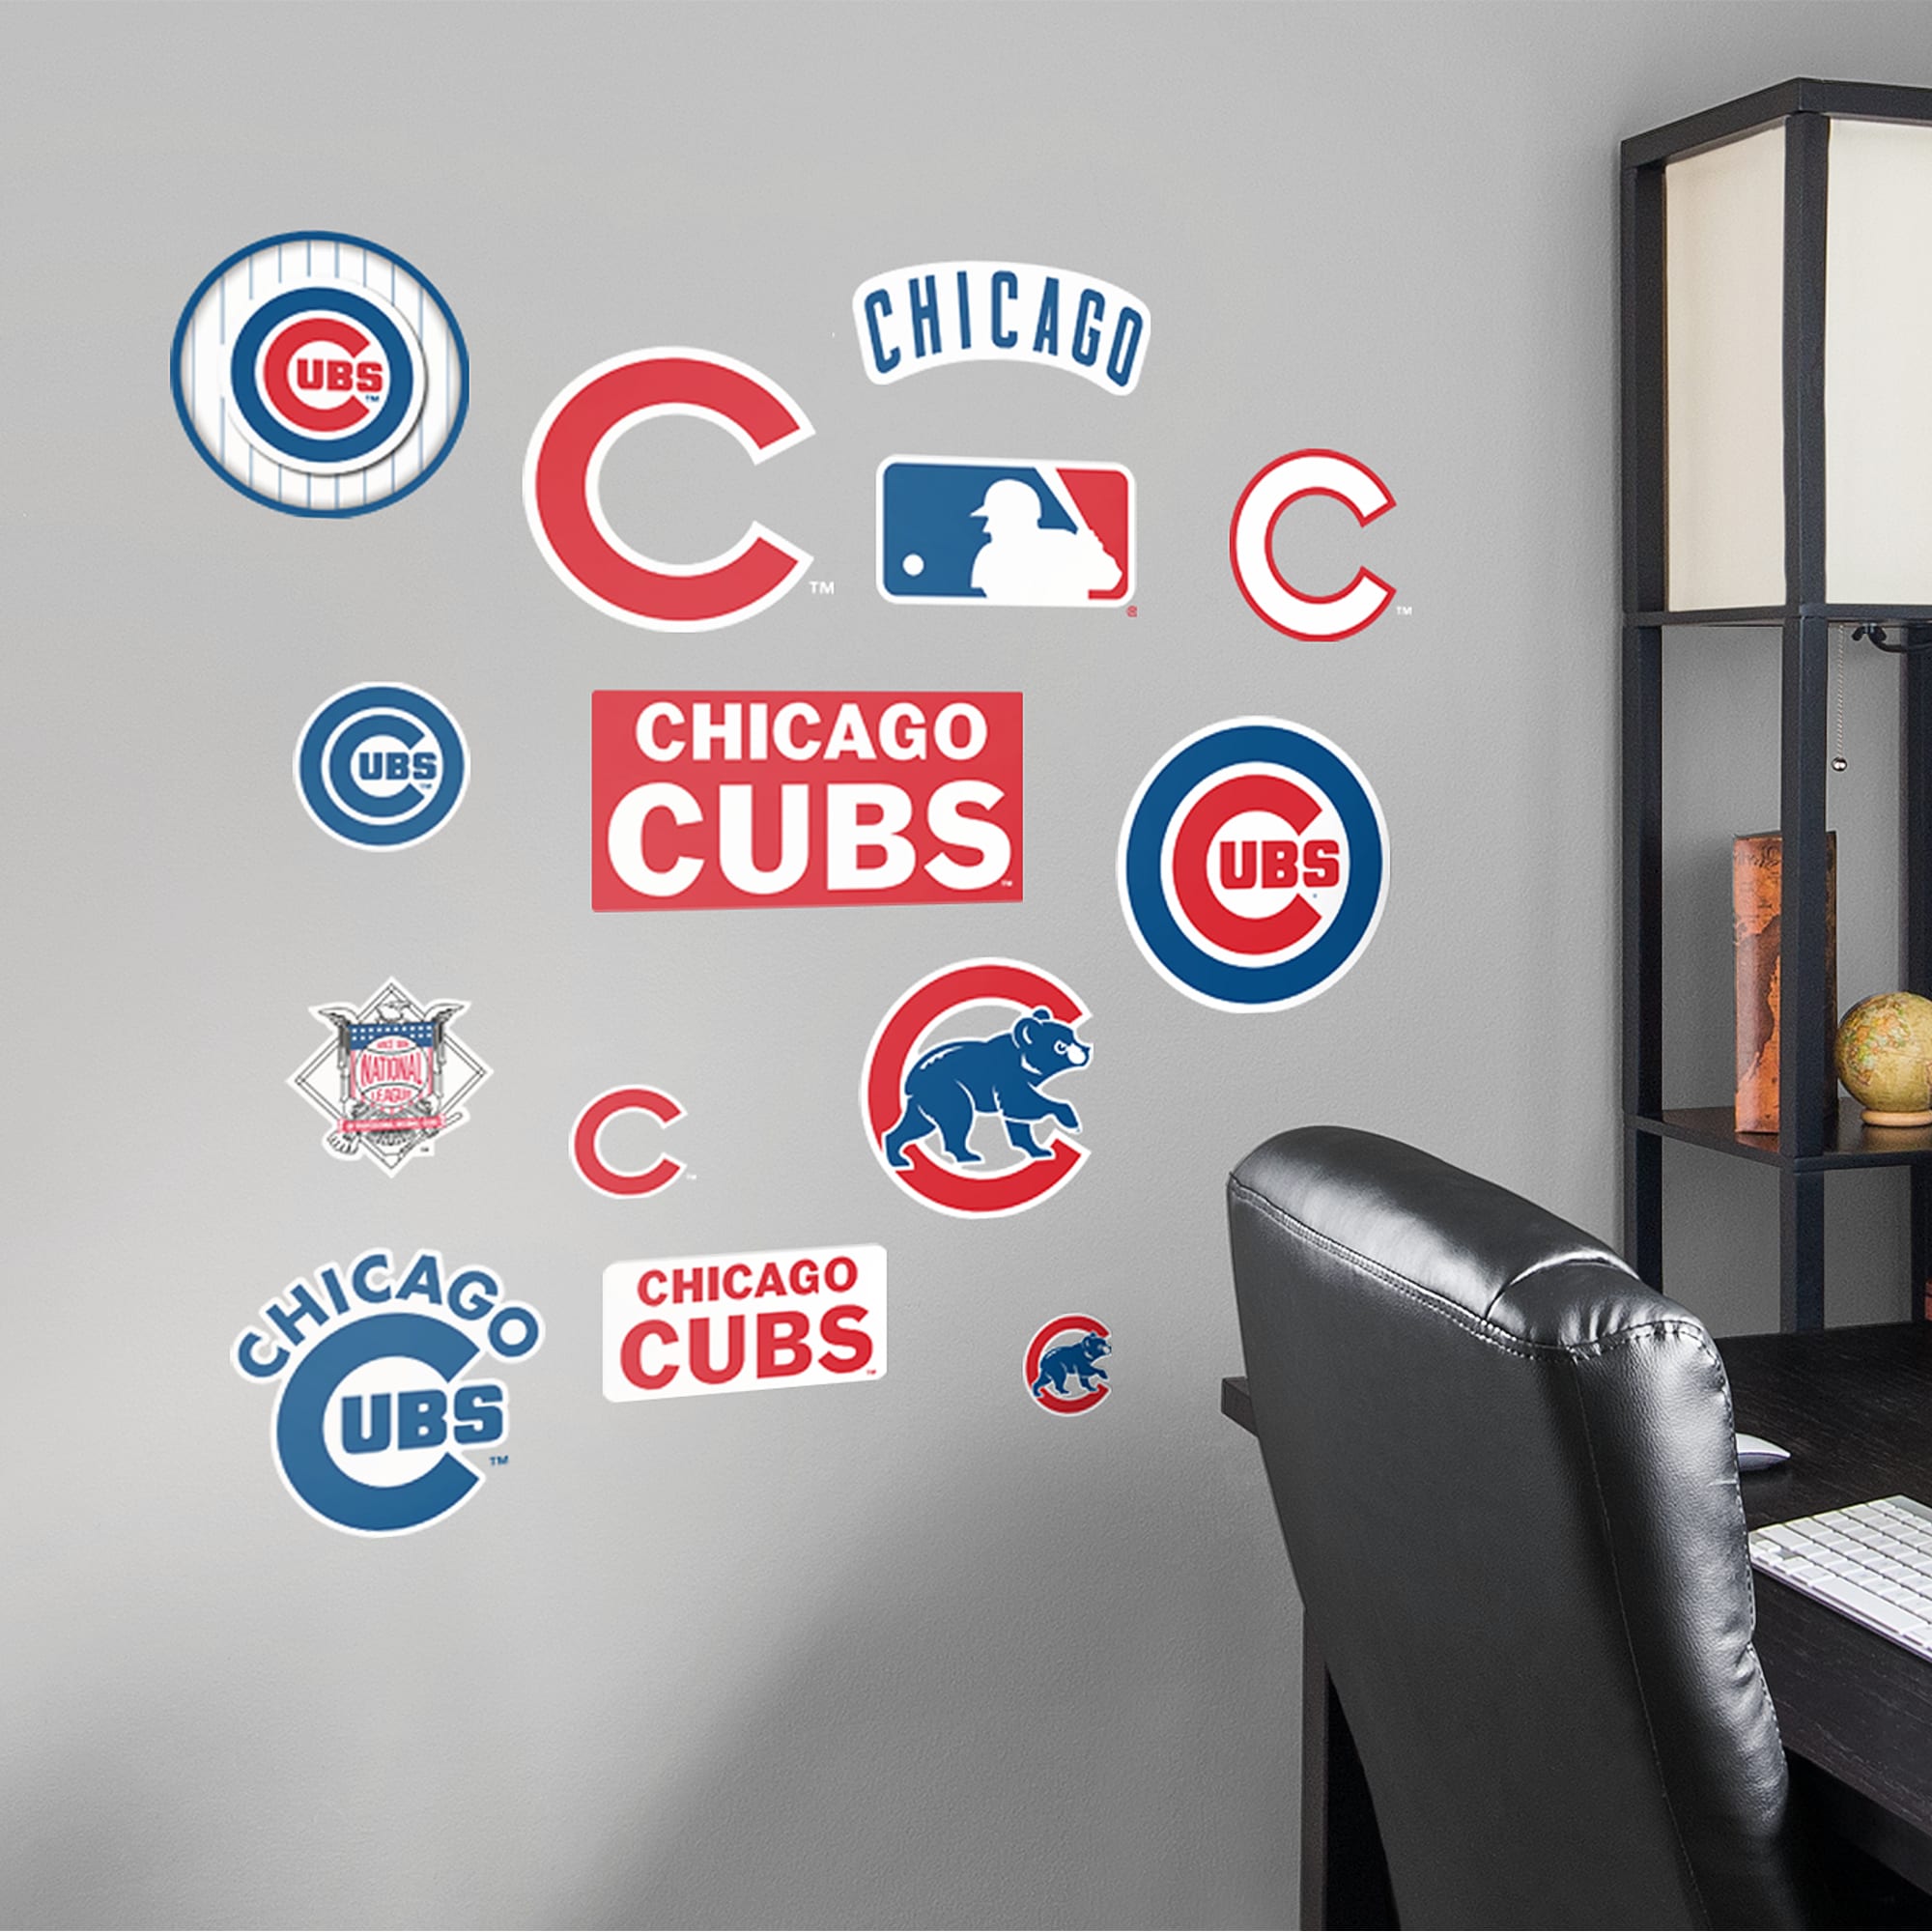 Chicago Cubs: Logo Assortment - Officially Licensed MLB Removable Wall Decals 75"W x 39.5"H by Fathead | Vinyl